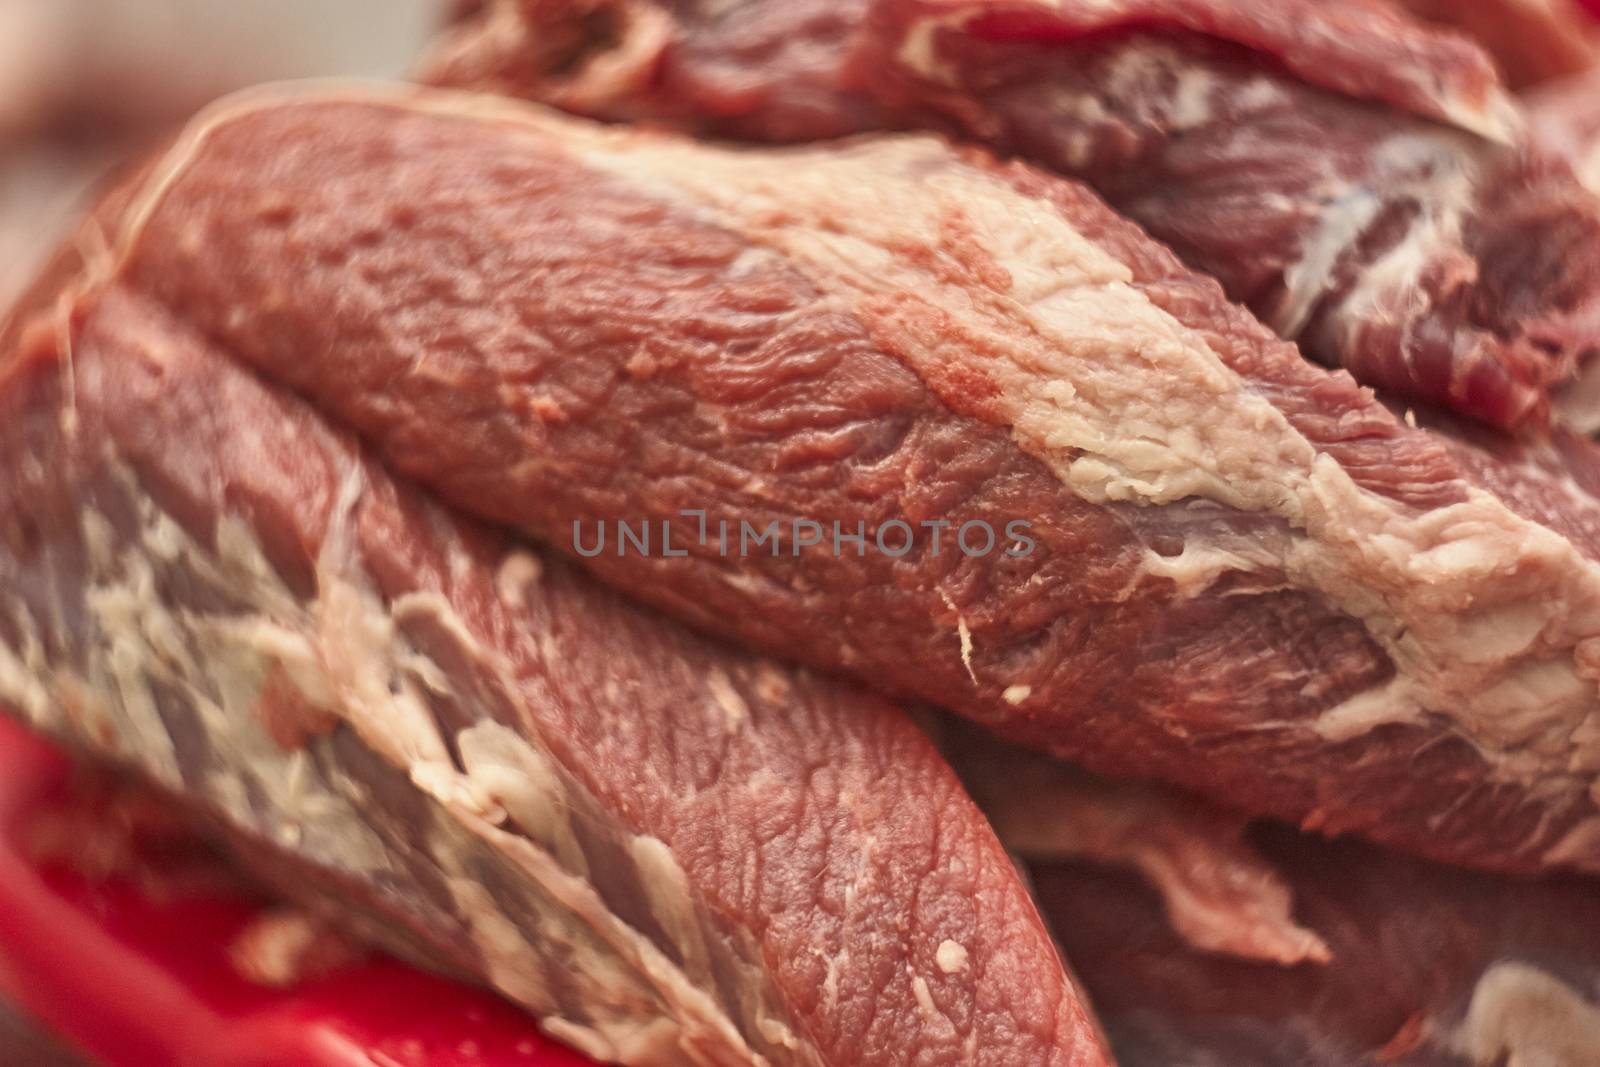 Fiber and details of calf meat by pippocarlot